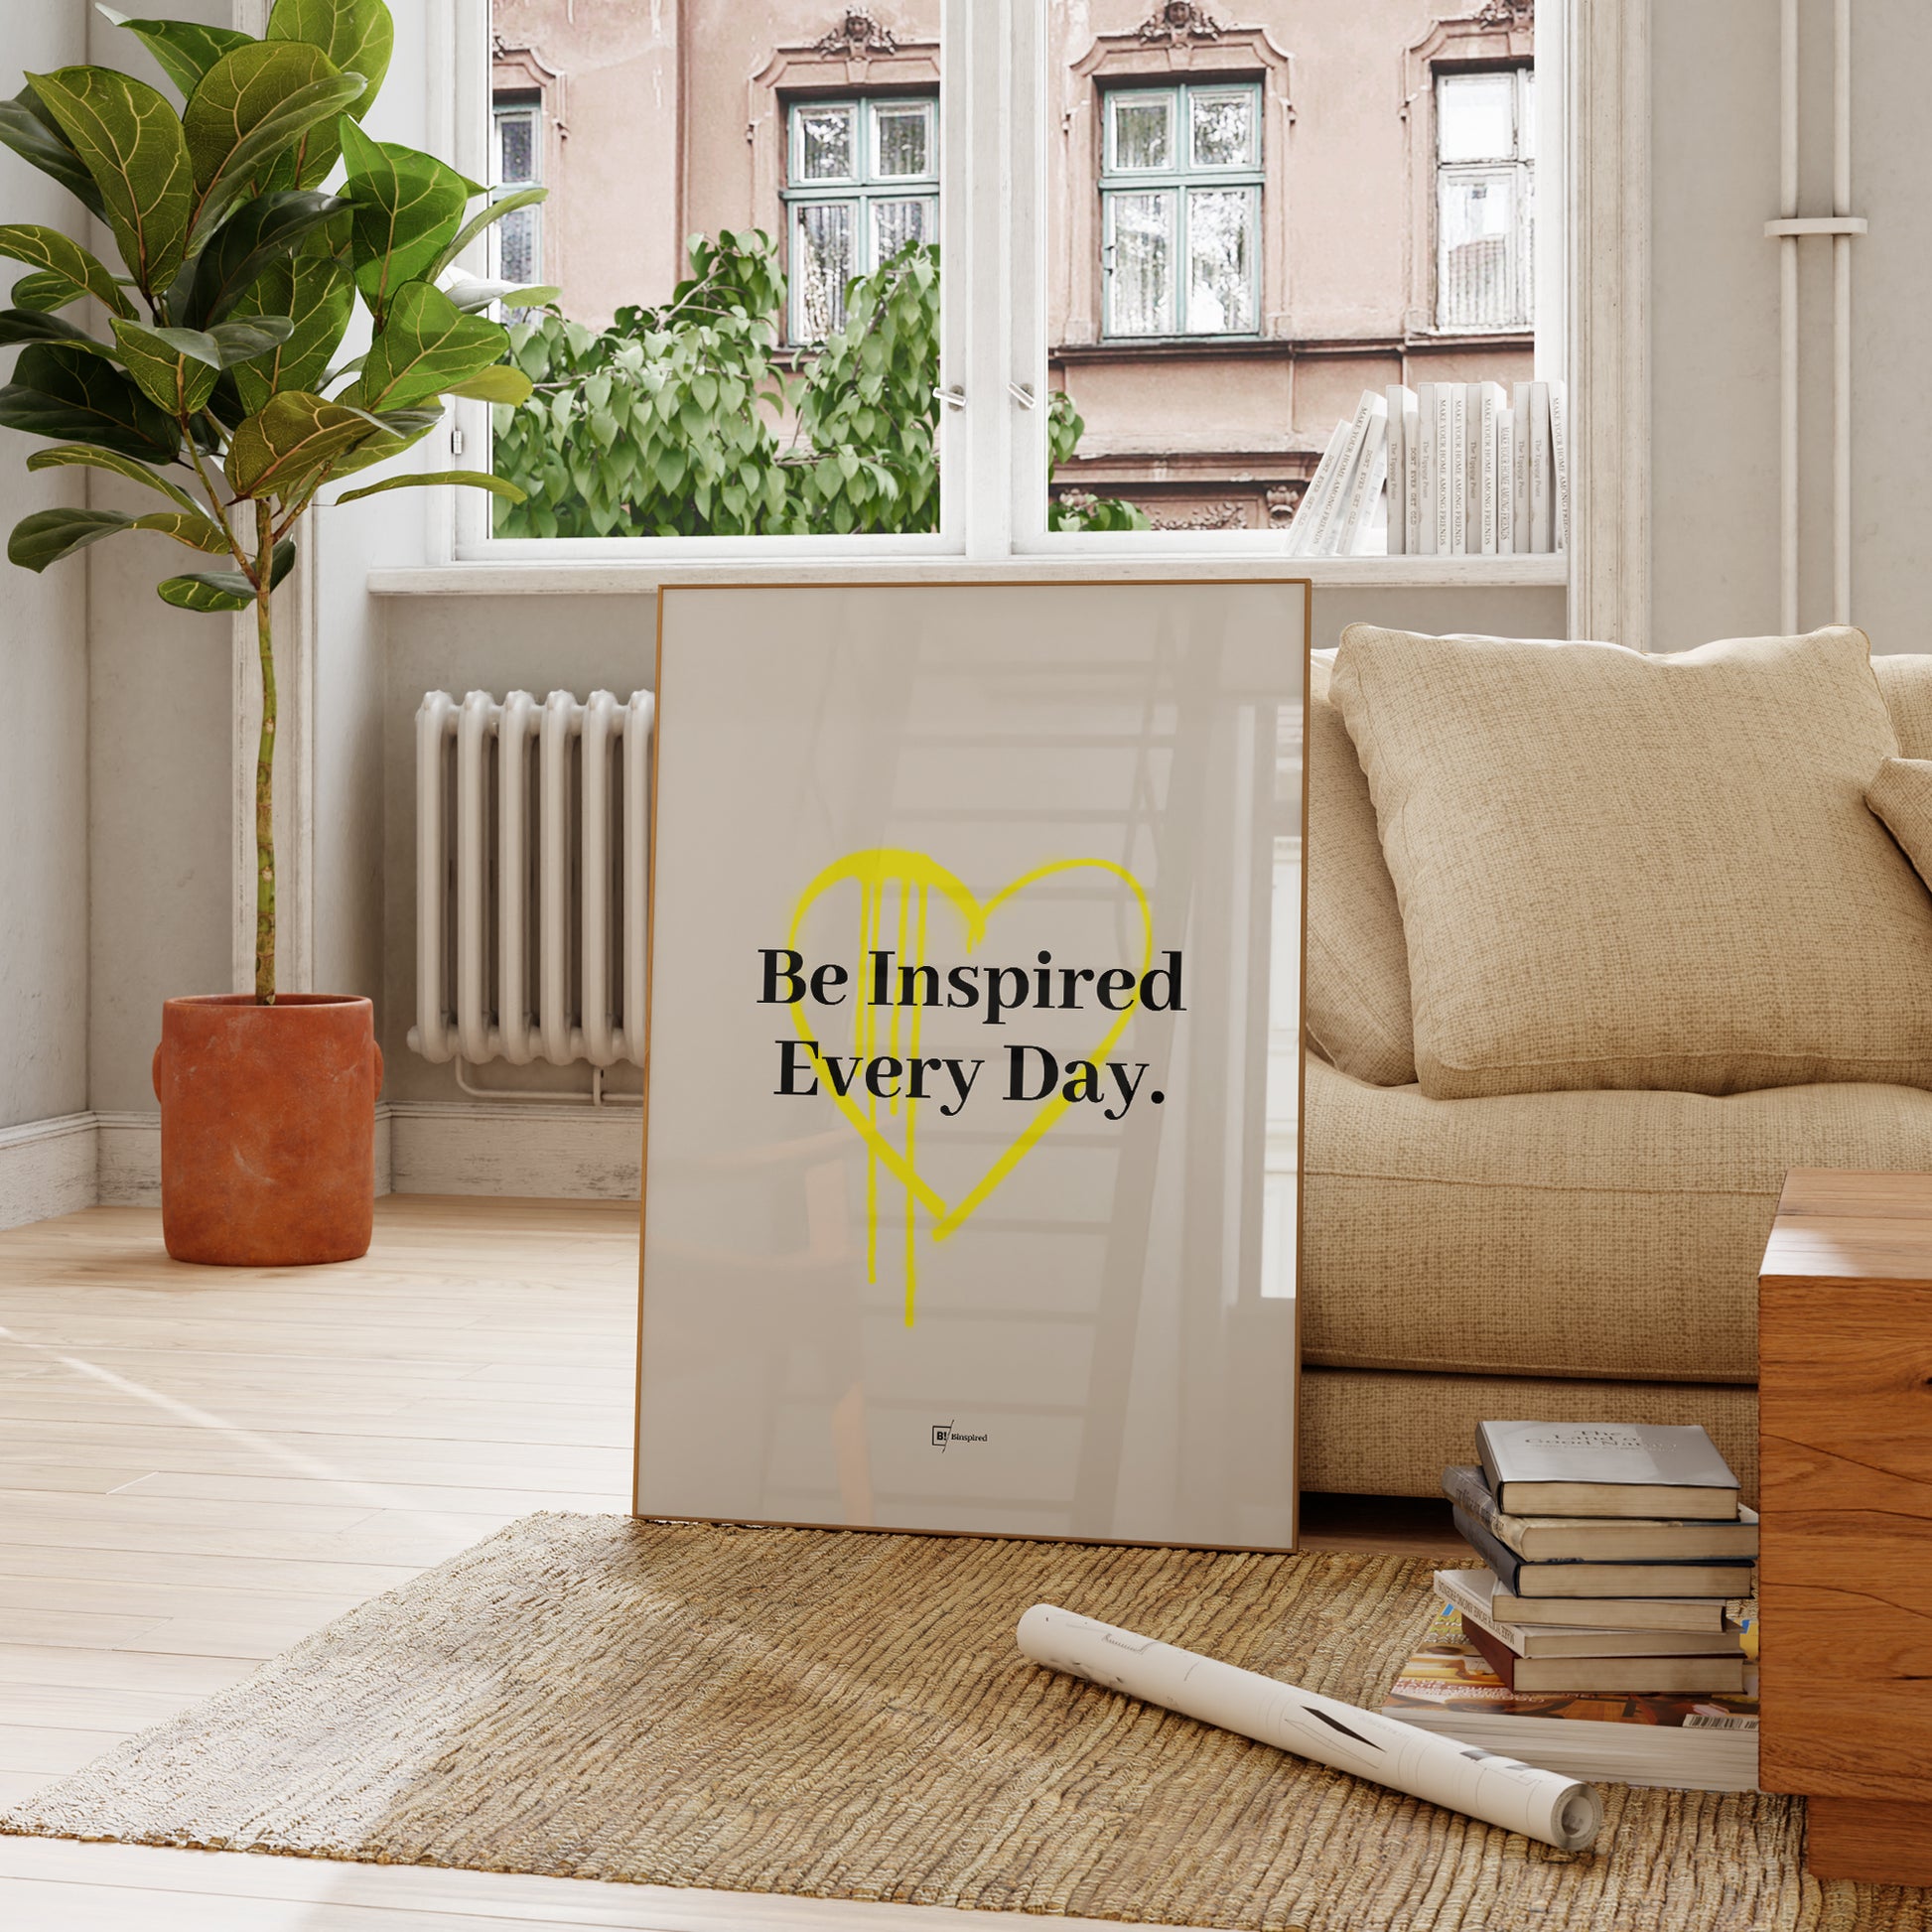 Be inspired by our "Be Inspired Every Day" quote art print! This artwork was printed using the giclée process on archival acid-free paper and is presented in a french living room that captures its timeless beauty in every detail.